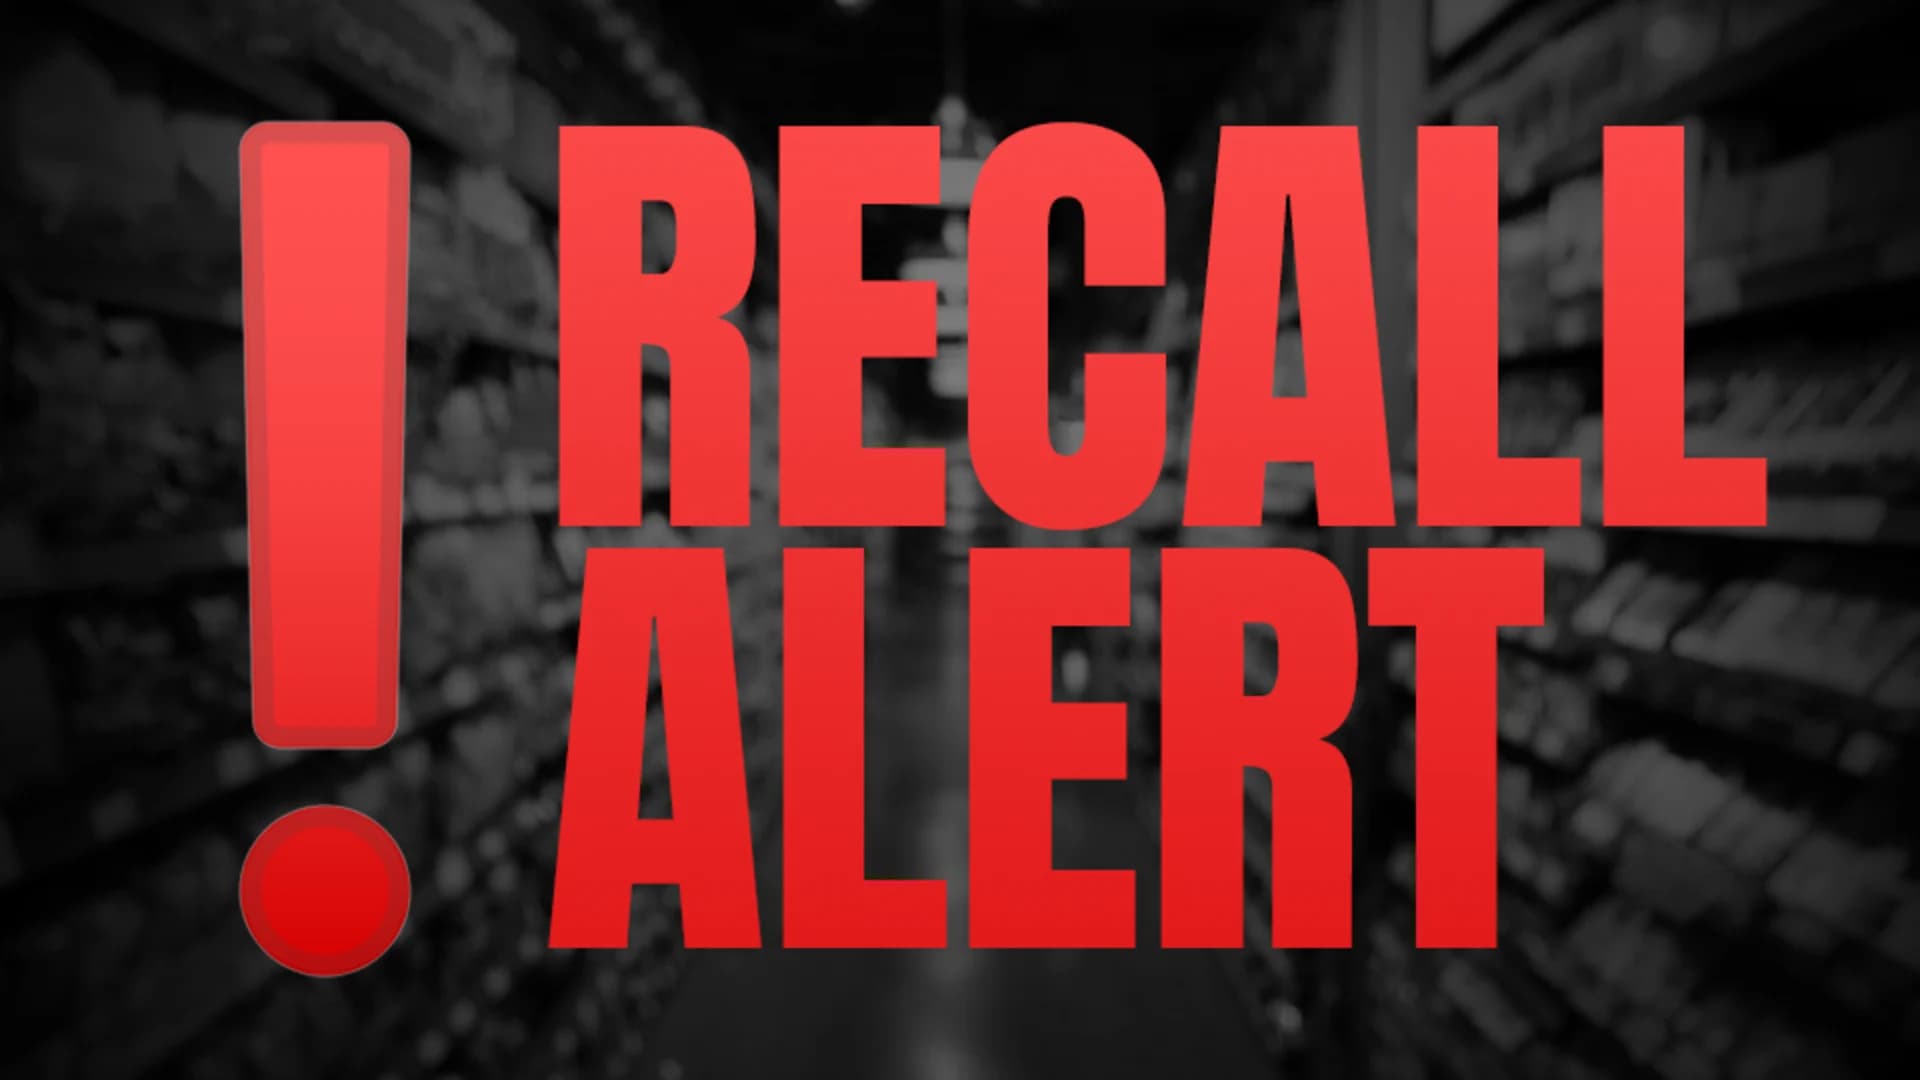 32 children’s medications recalled for microbial contamination